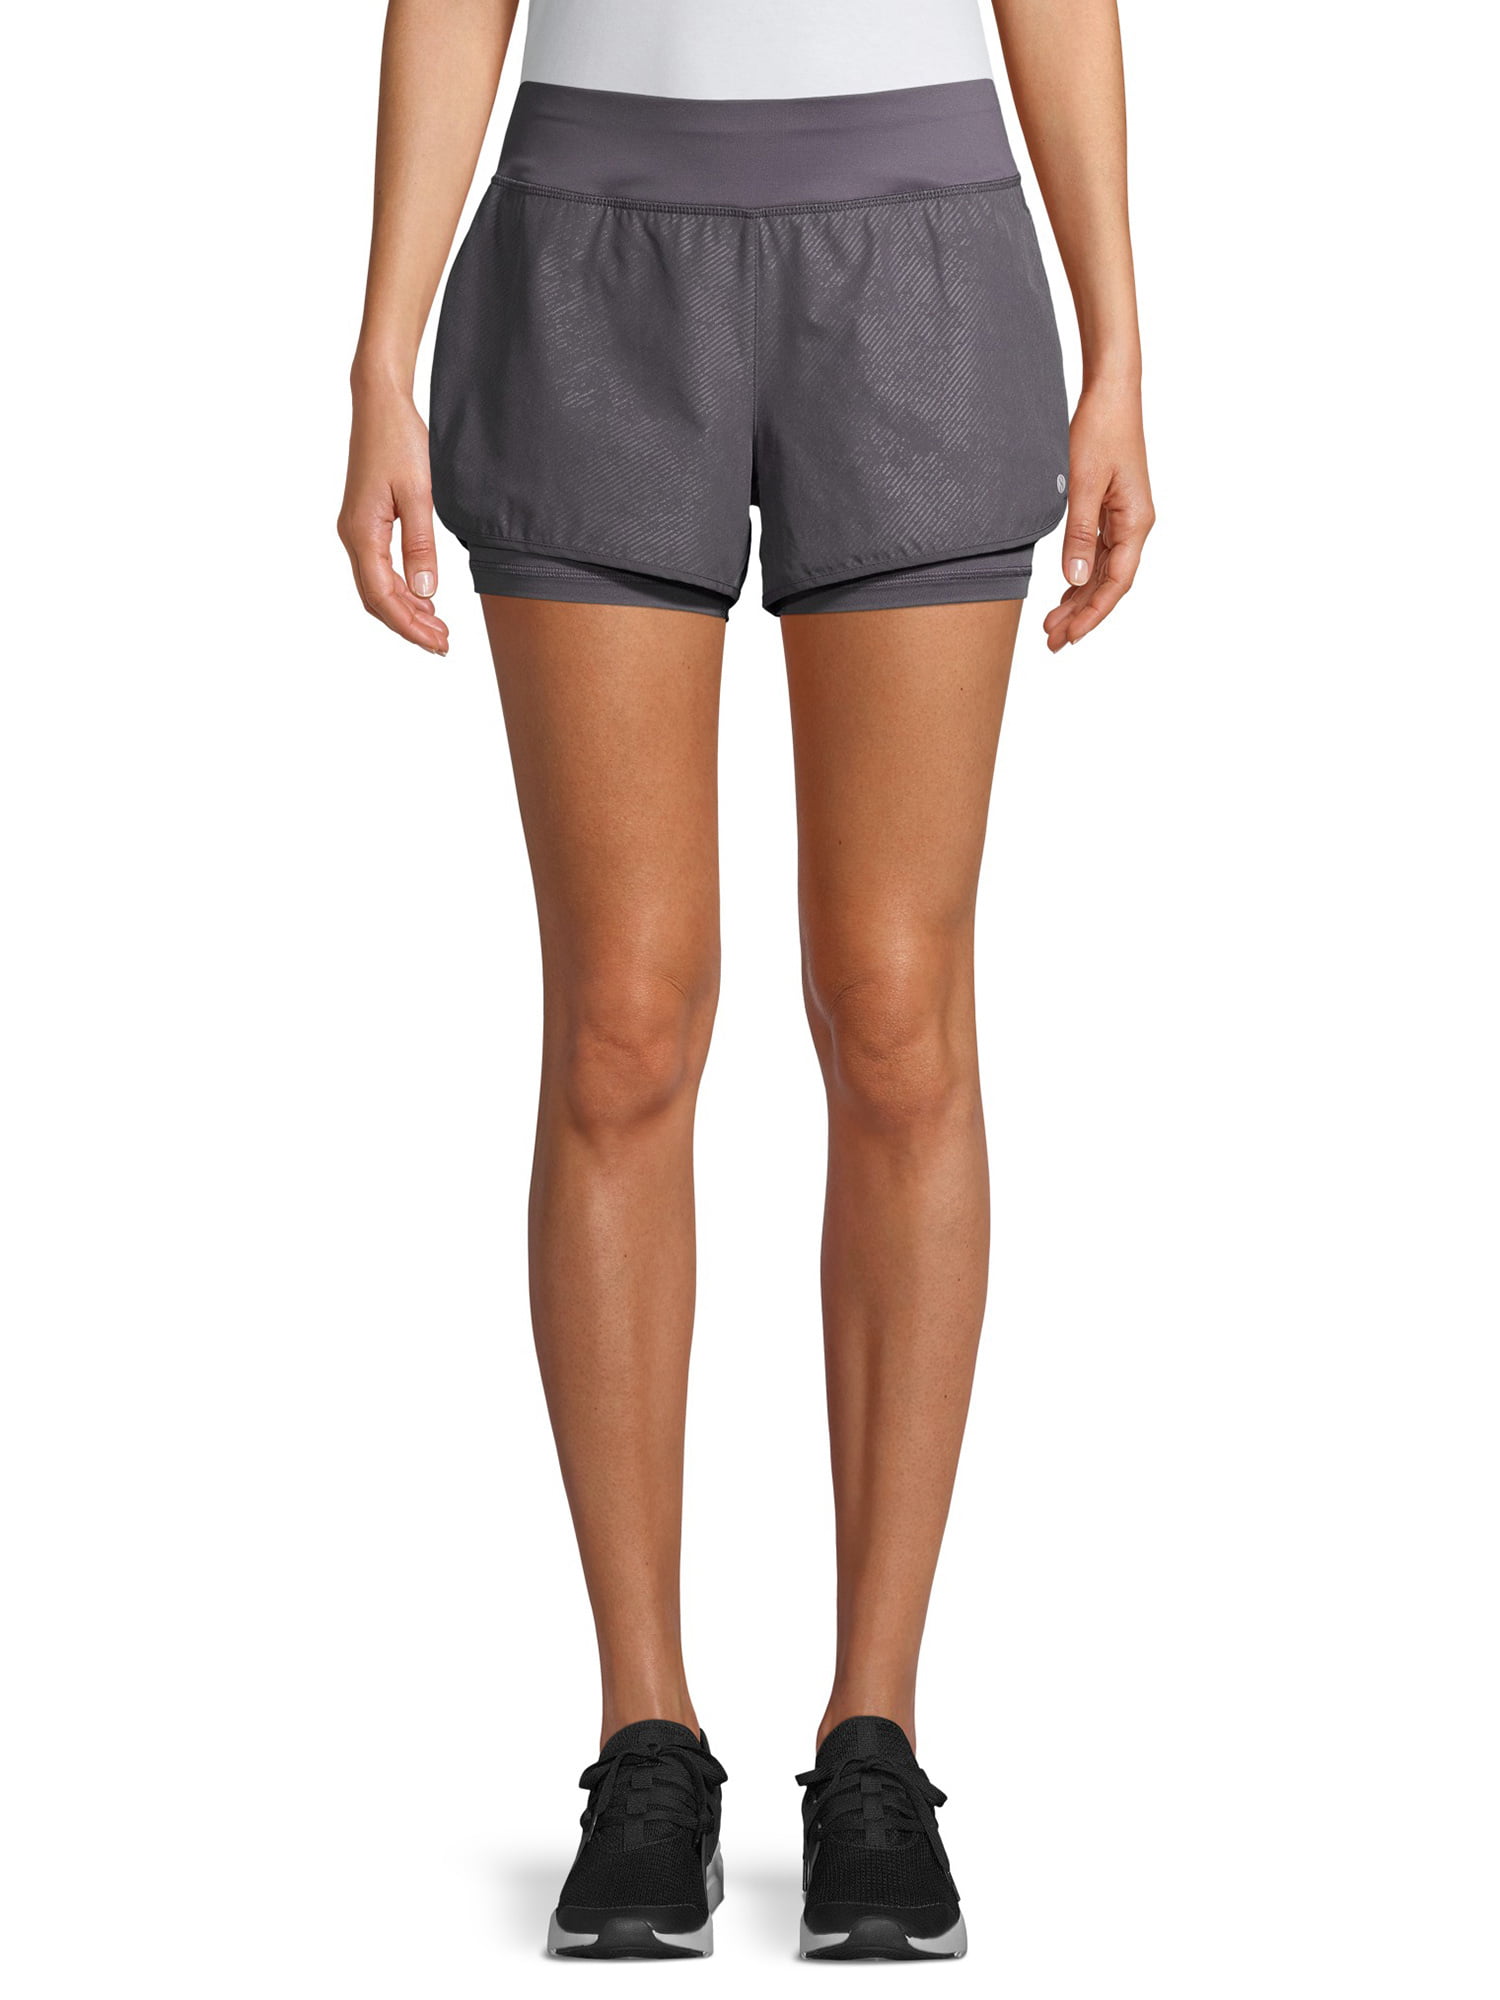 Layer 8 Womens Knit and Woven Quick Dry Two in One Running Yoga Work Out Short with Compression Shorts Underneath